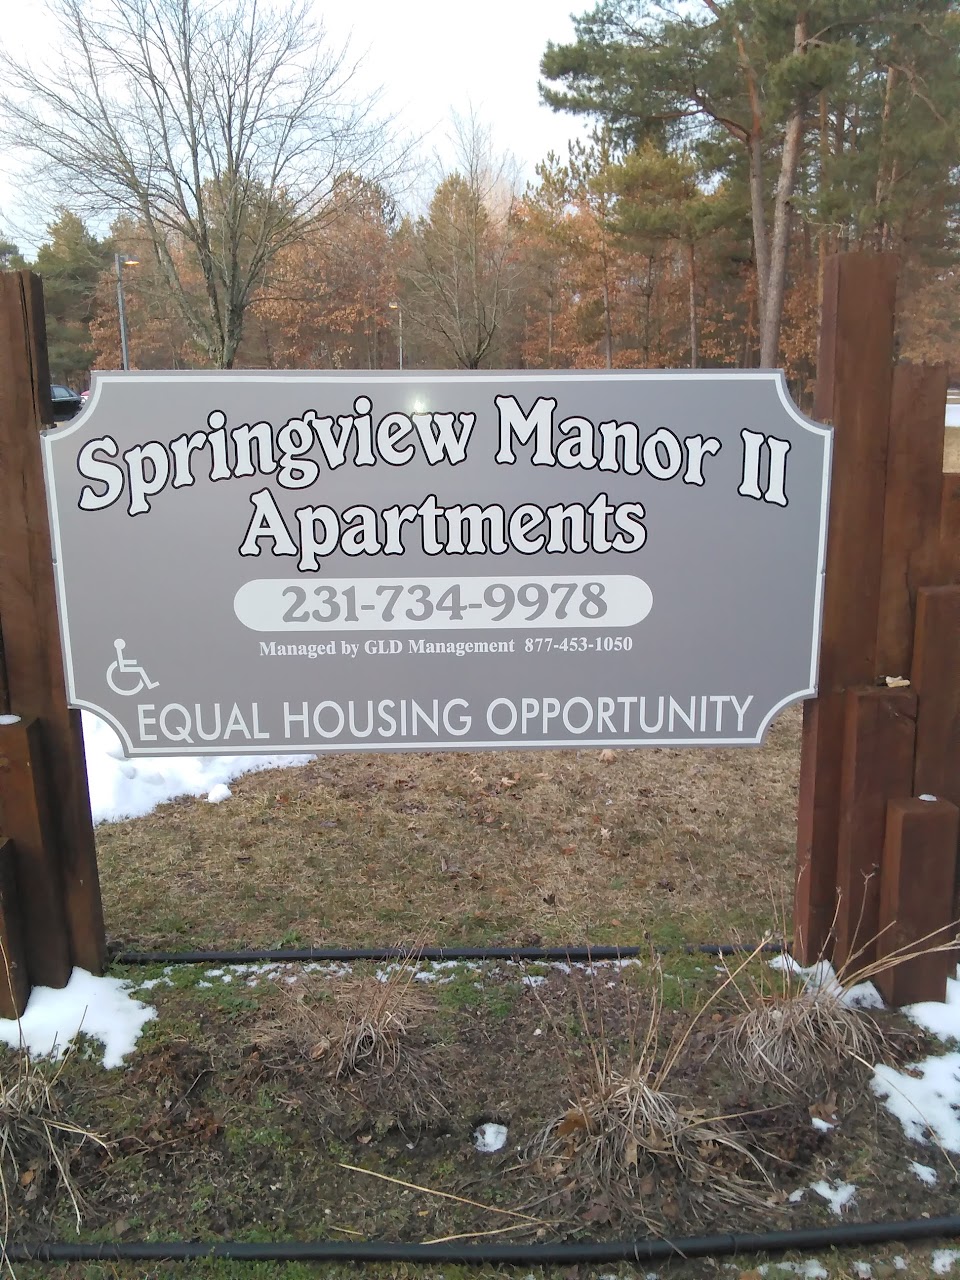 Photo of SPRINGVIEW MANOR. Affordable housing located at 479 W JEFFERSON ST EVART, MI 49631